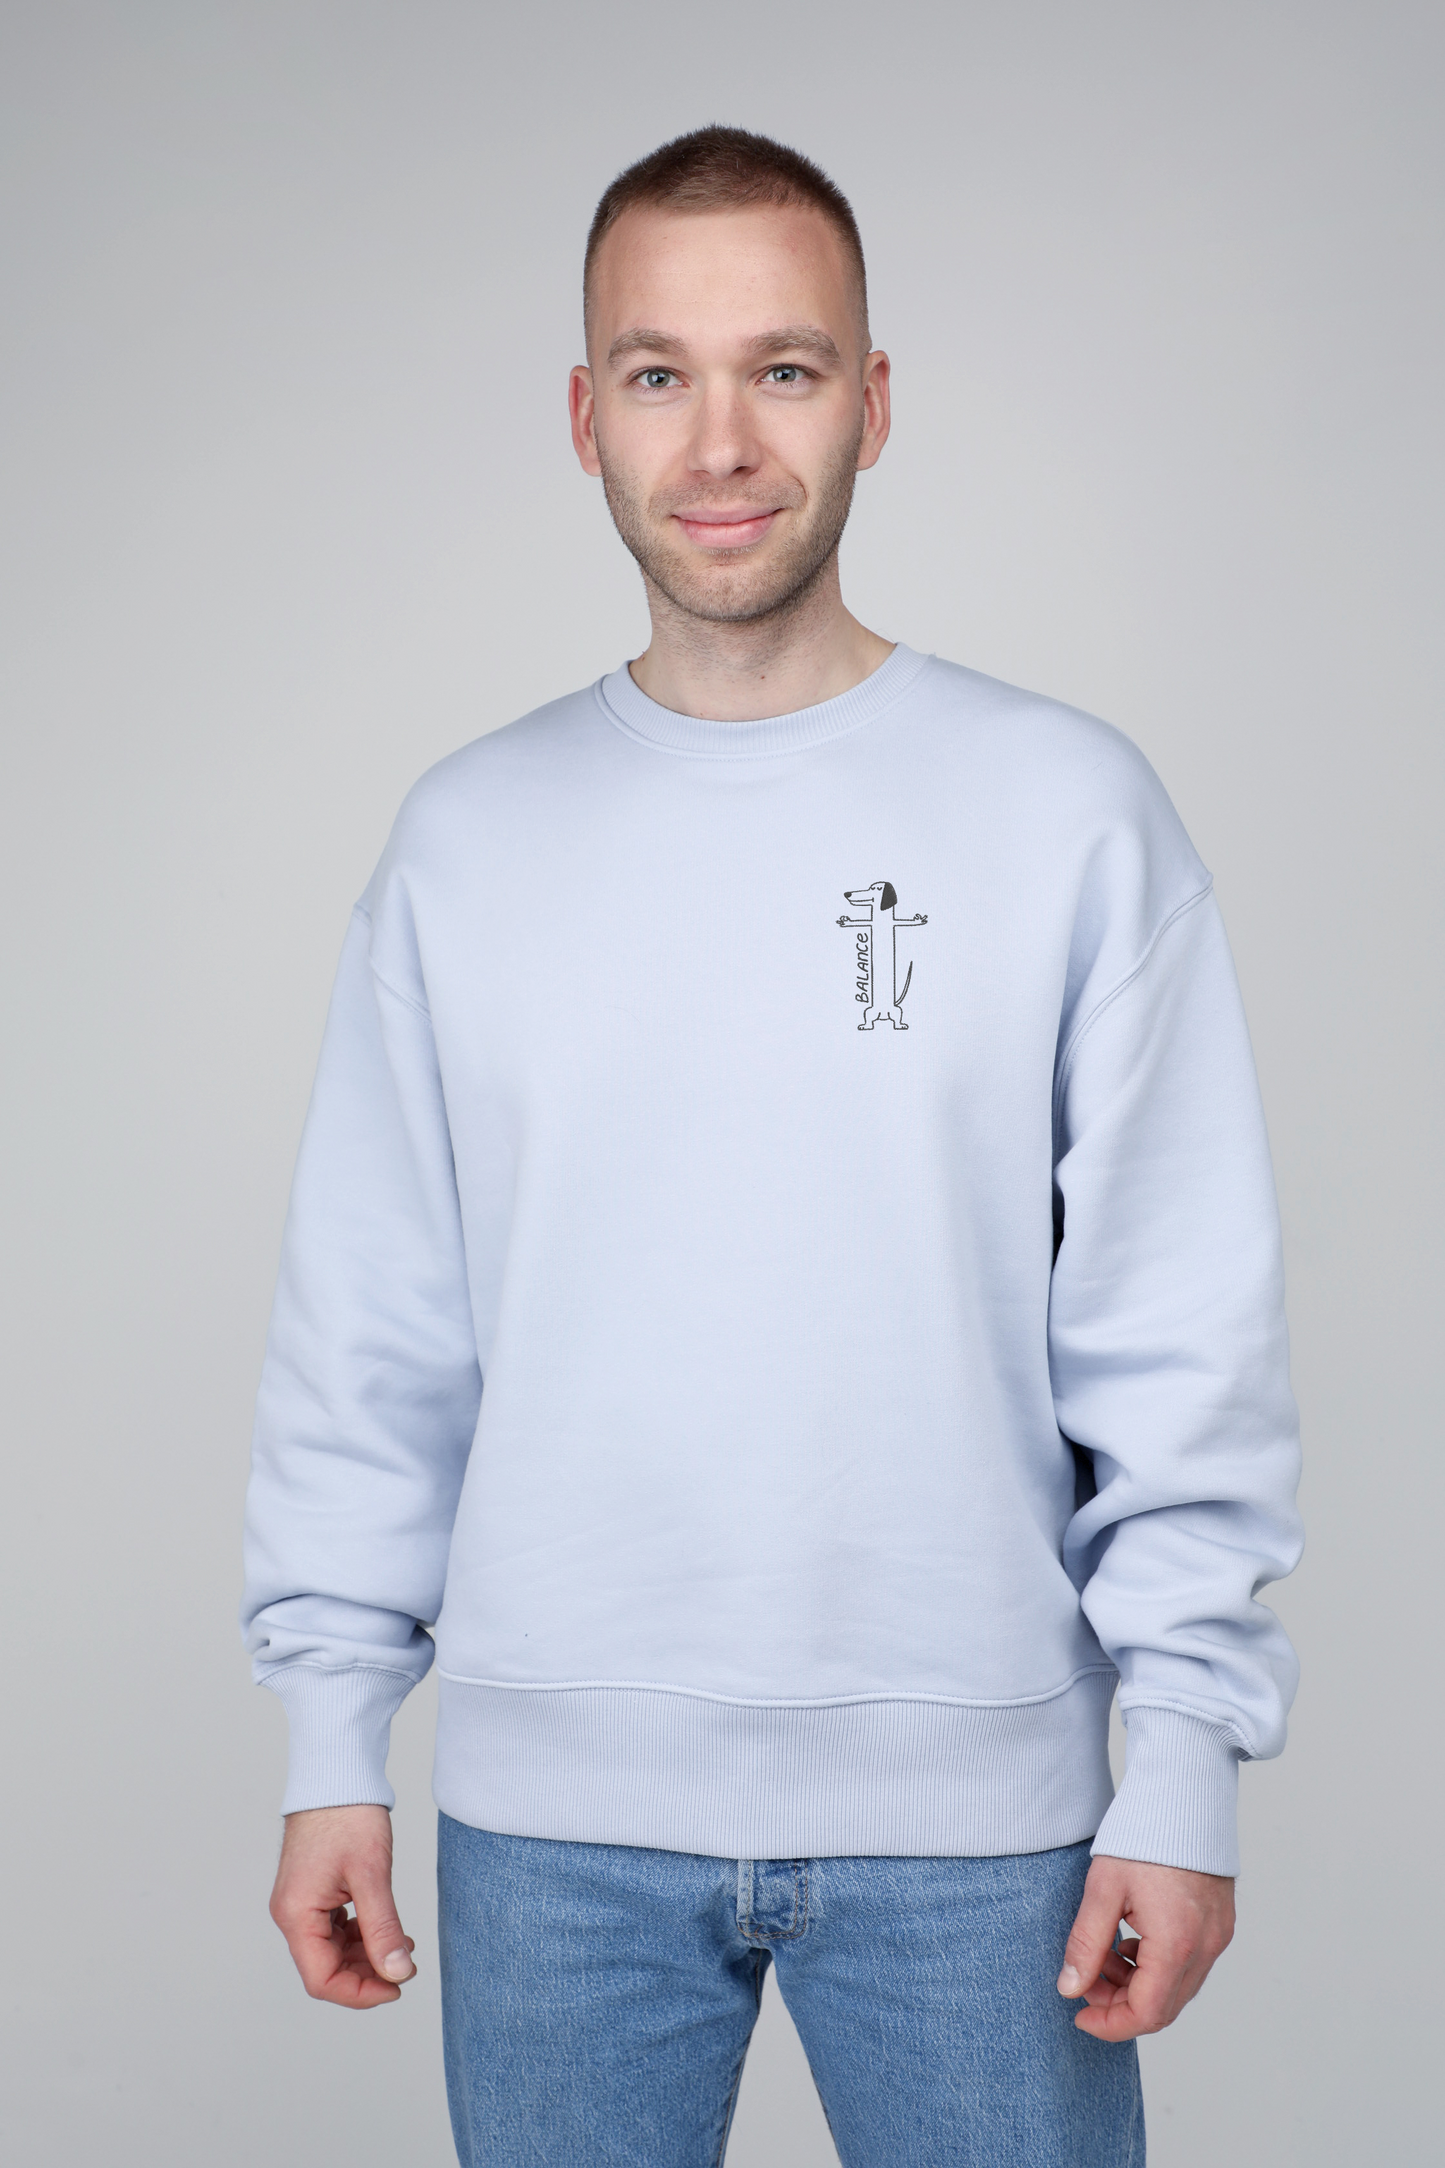 Balance | Crew neck sweatshirt with embroidered dog. Oversize fit | Unisex by My Wild Other